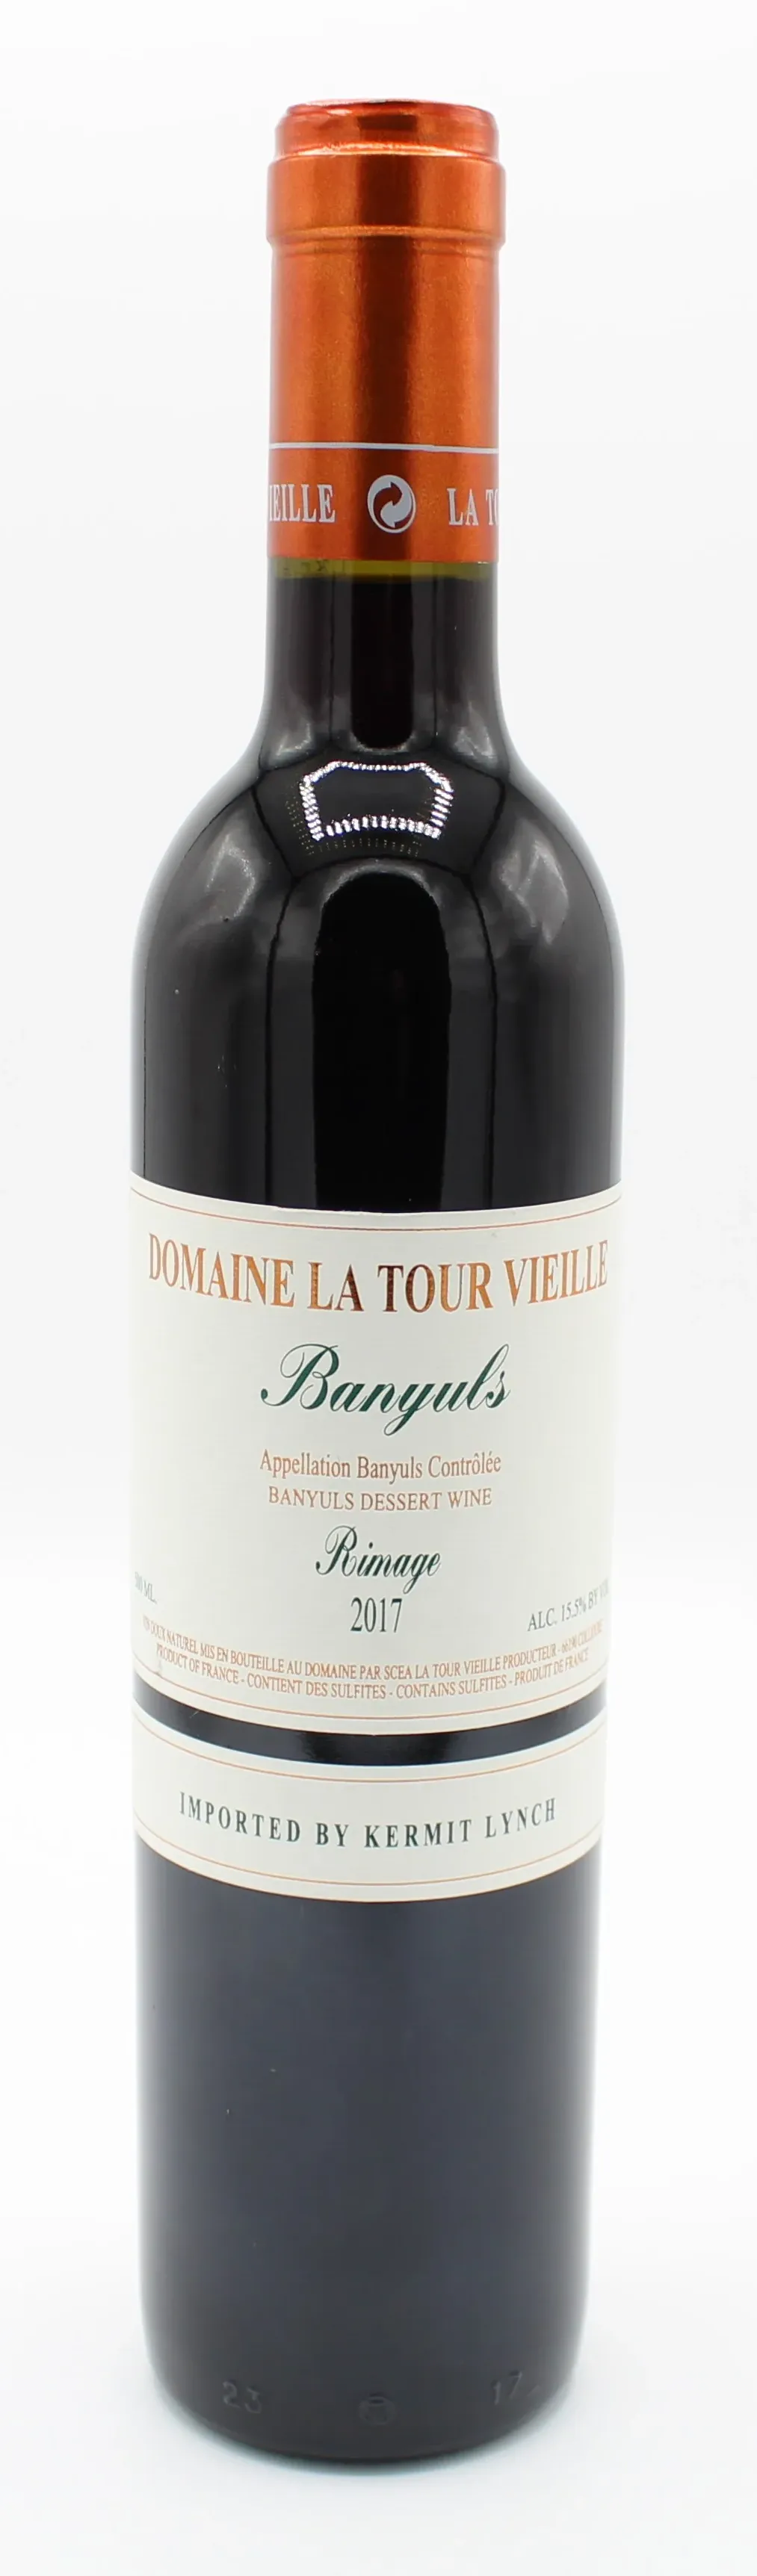 Bottle of Domaine La Tour Vieille Rimage Banyulswith label visible